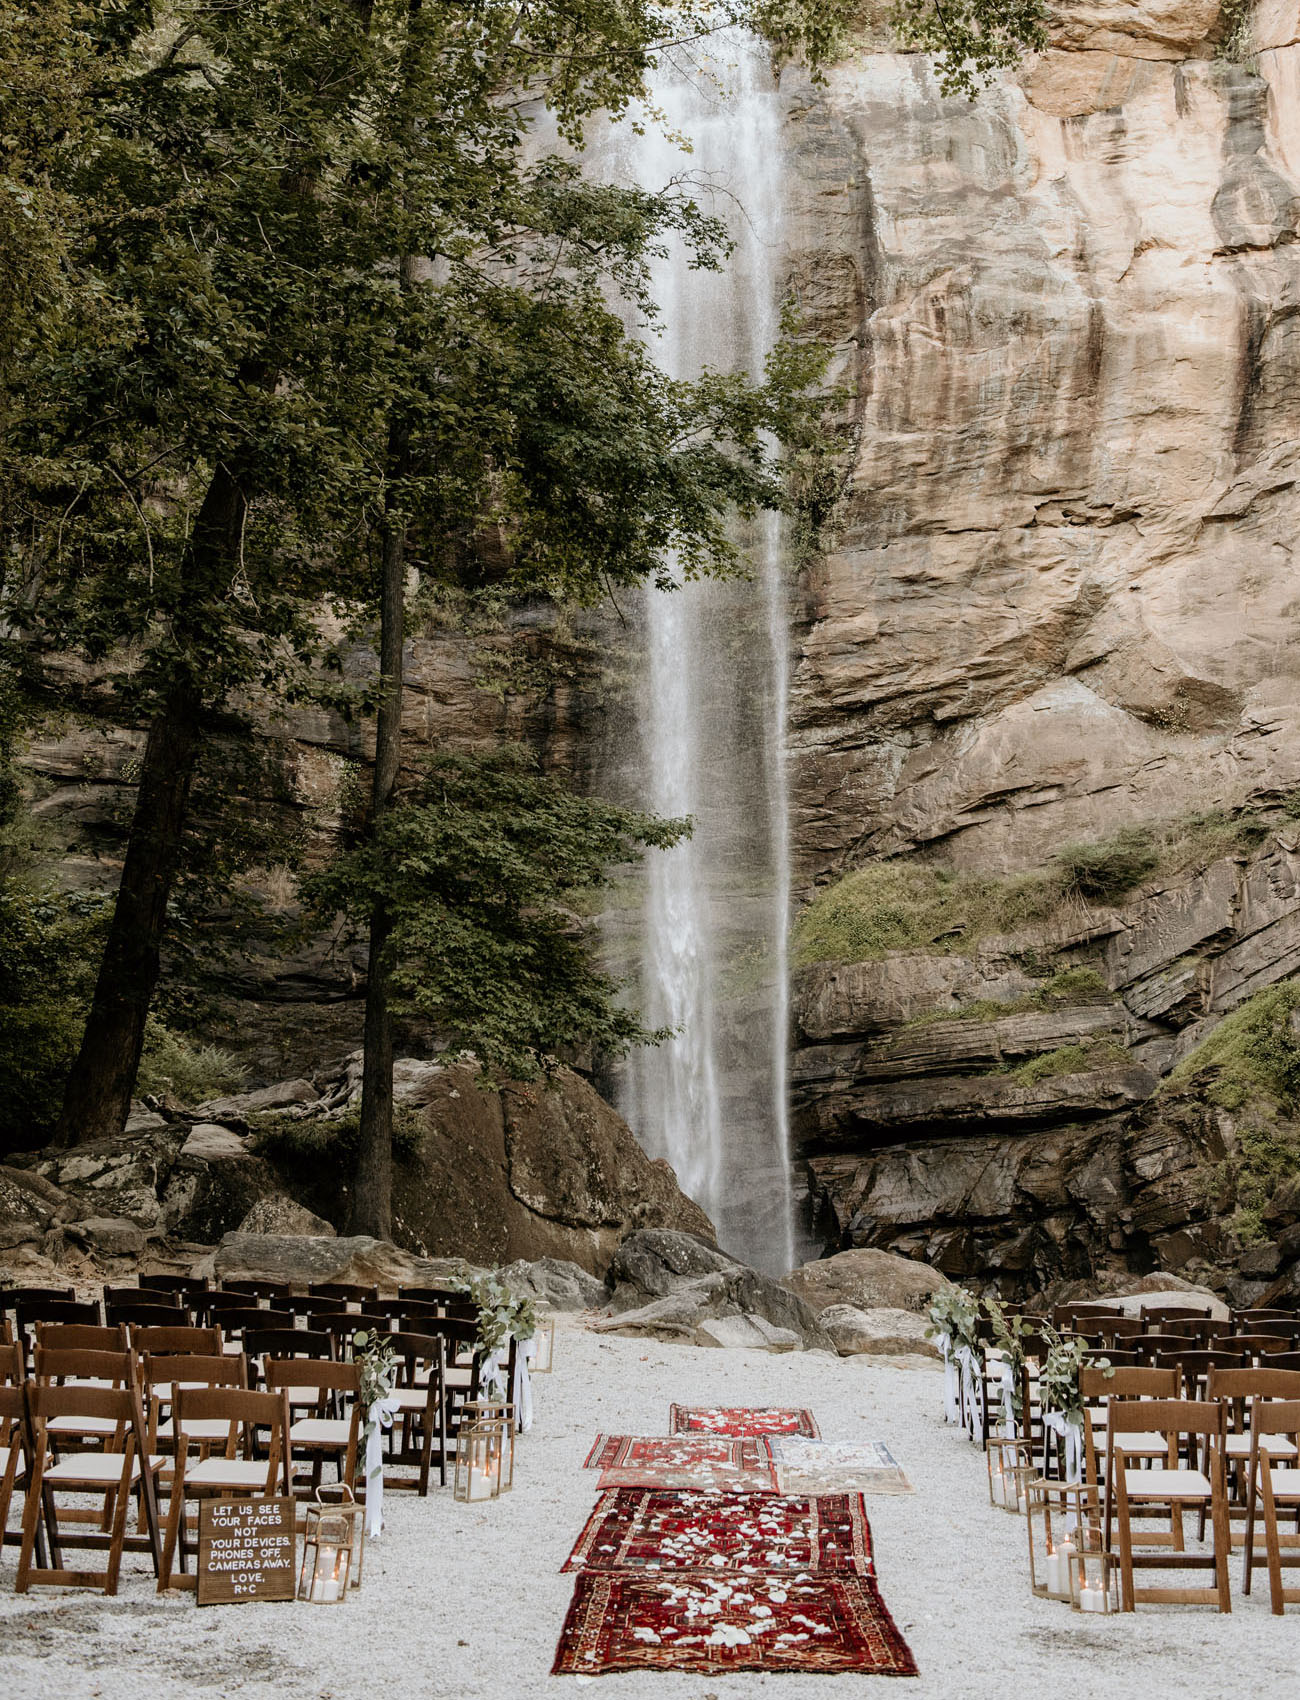 The wedding ceremony space was great   there was a waterfall, vintage rugs and some candles